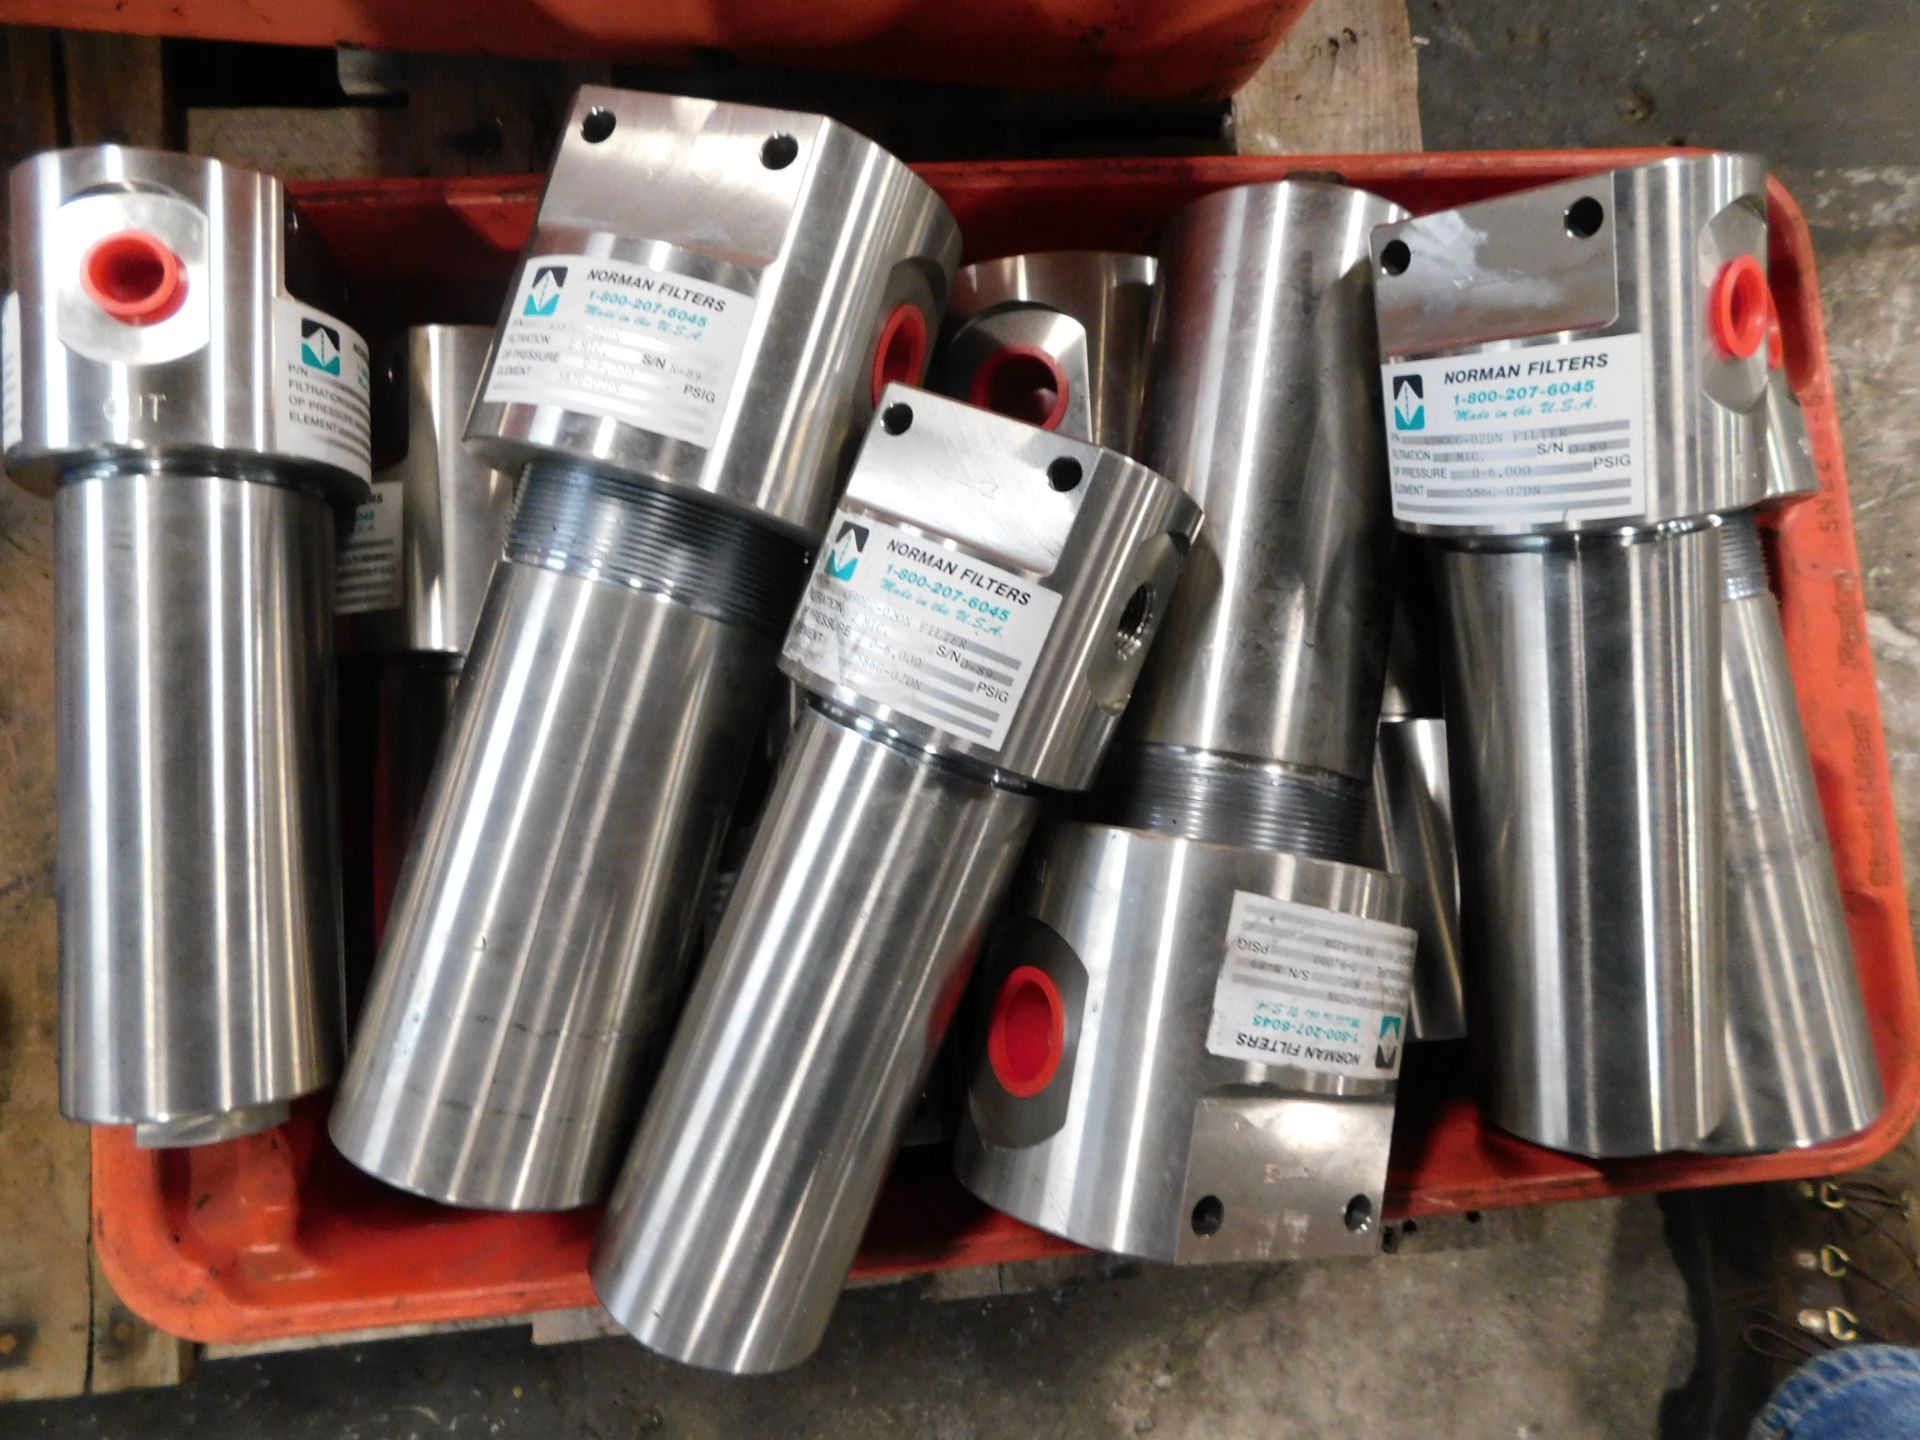 LOT OF MISC NORMAN AND REXROTH FILTERS, ROSEMOUNT 8732EST1A1N0M4 TRANSMITTER, AND SUNNEN STONE SETS. - Image 2 of 8